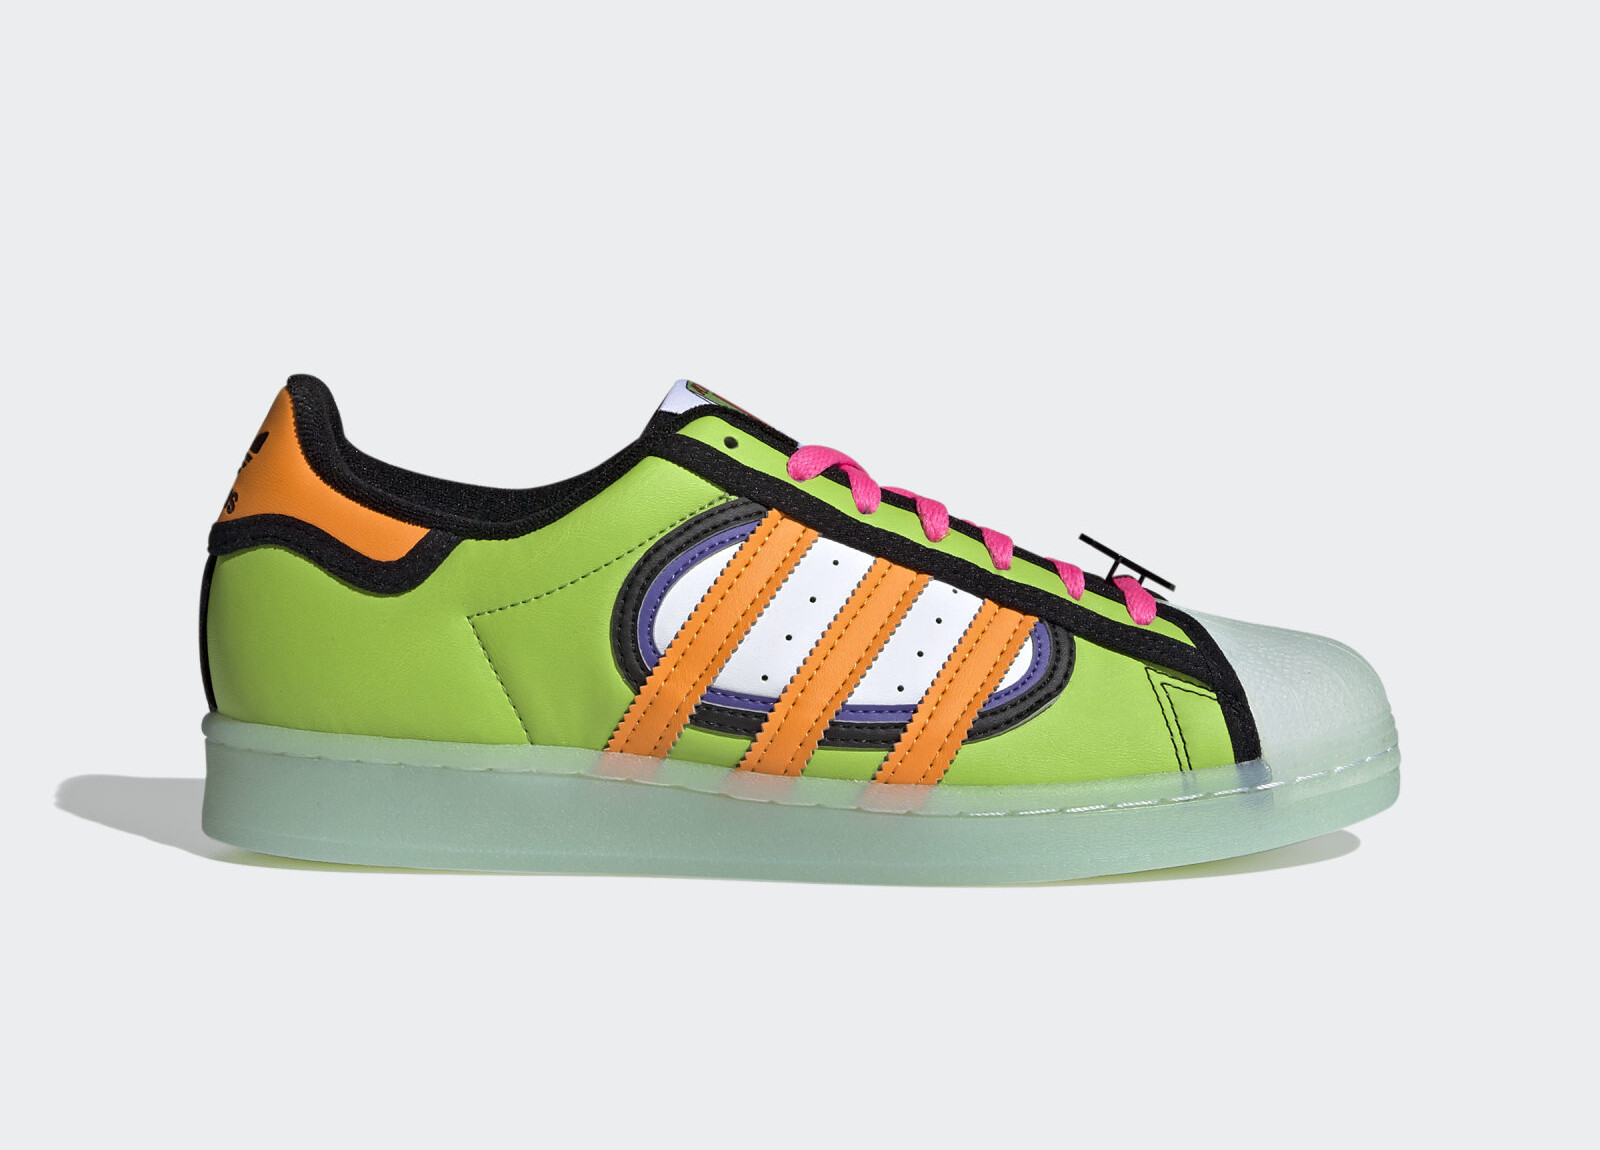 The Simpsons x Adidas
Superstar « Squishee »